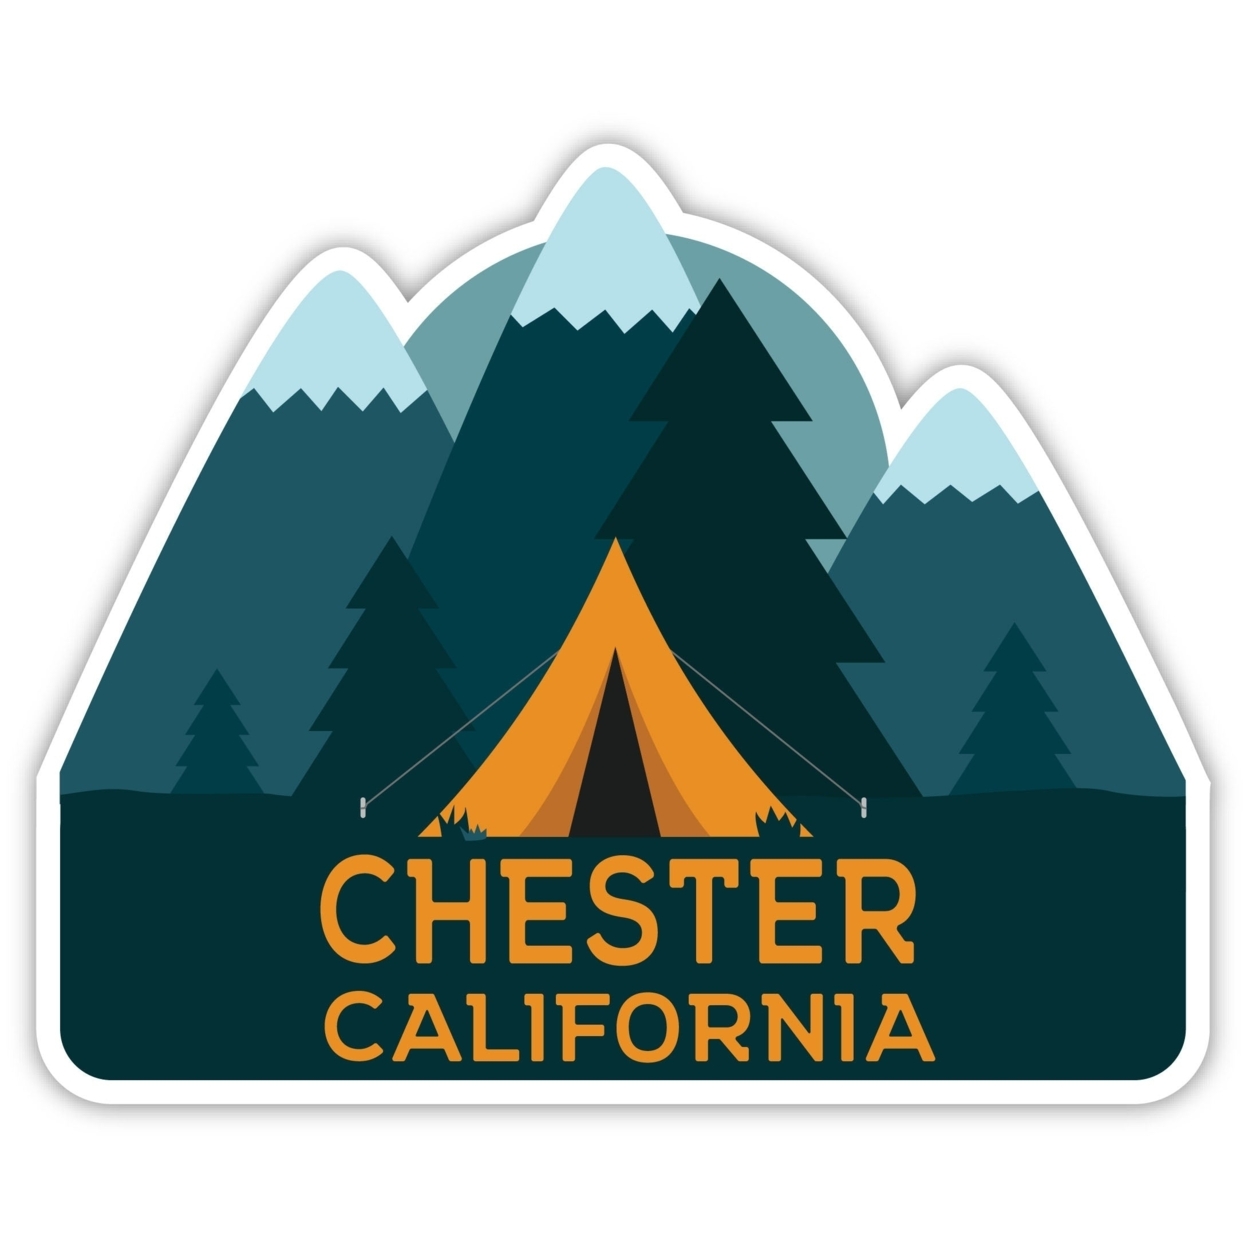 Chester California Souvenir Decorative Stickers (Choose Theme And Size) - 4-Pack, 8-Inch, Tent